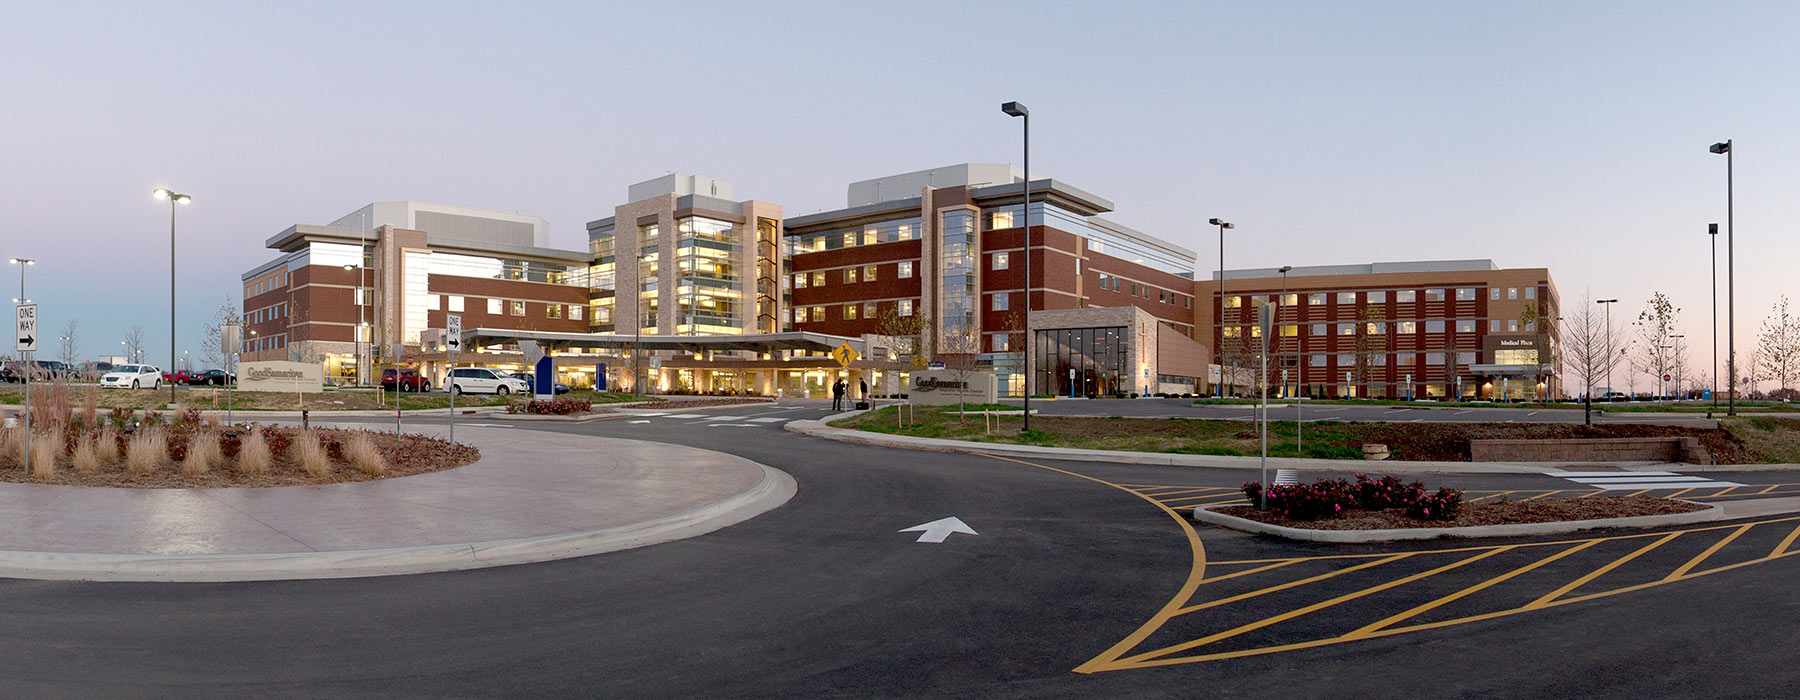 View of St. Mary's Good Samaritan Hospital from the parking lot in Mount Vernon, Illinois